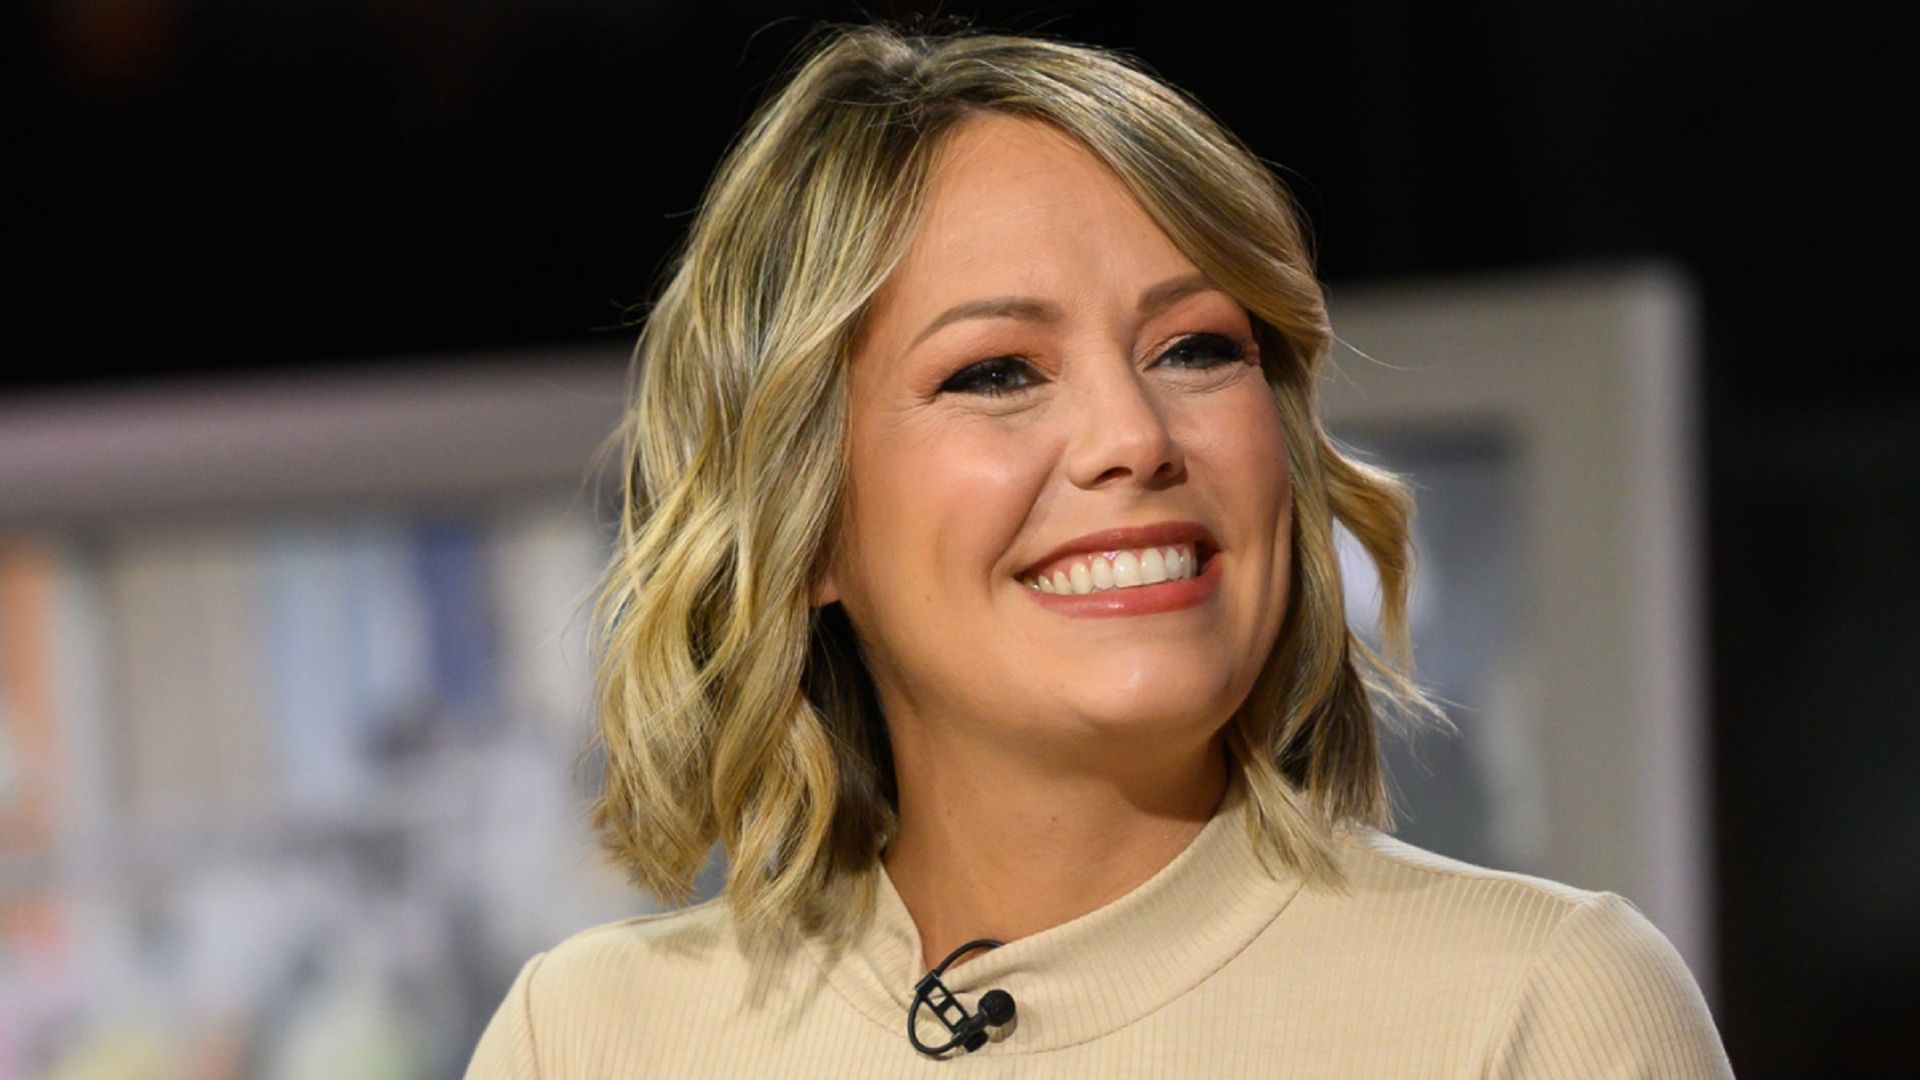 Dylan Dreyer shares emotional career moment with Today after giving birth